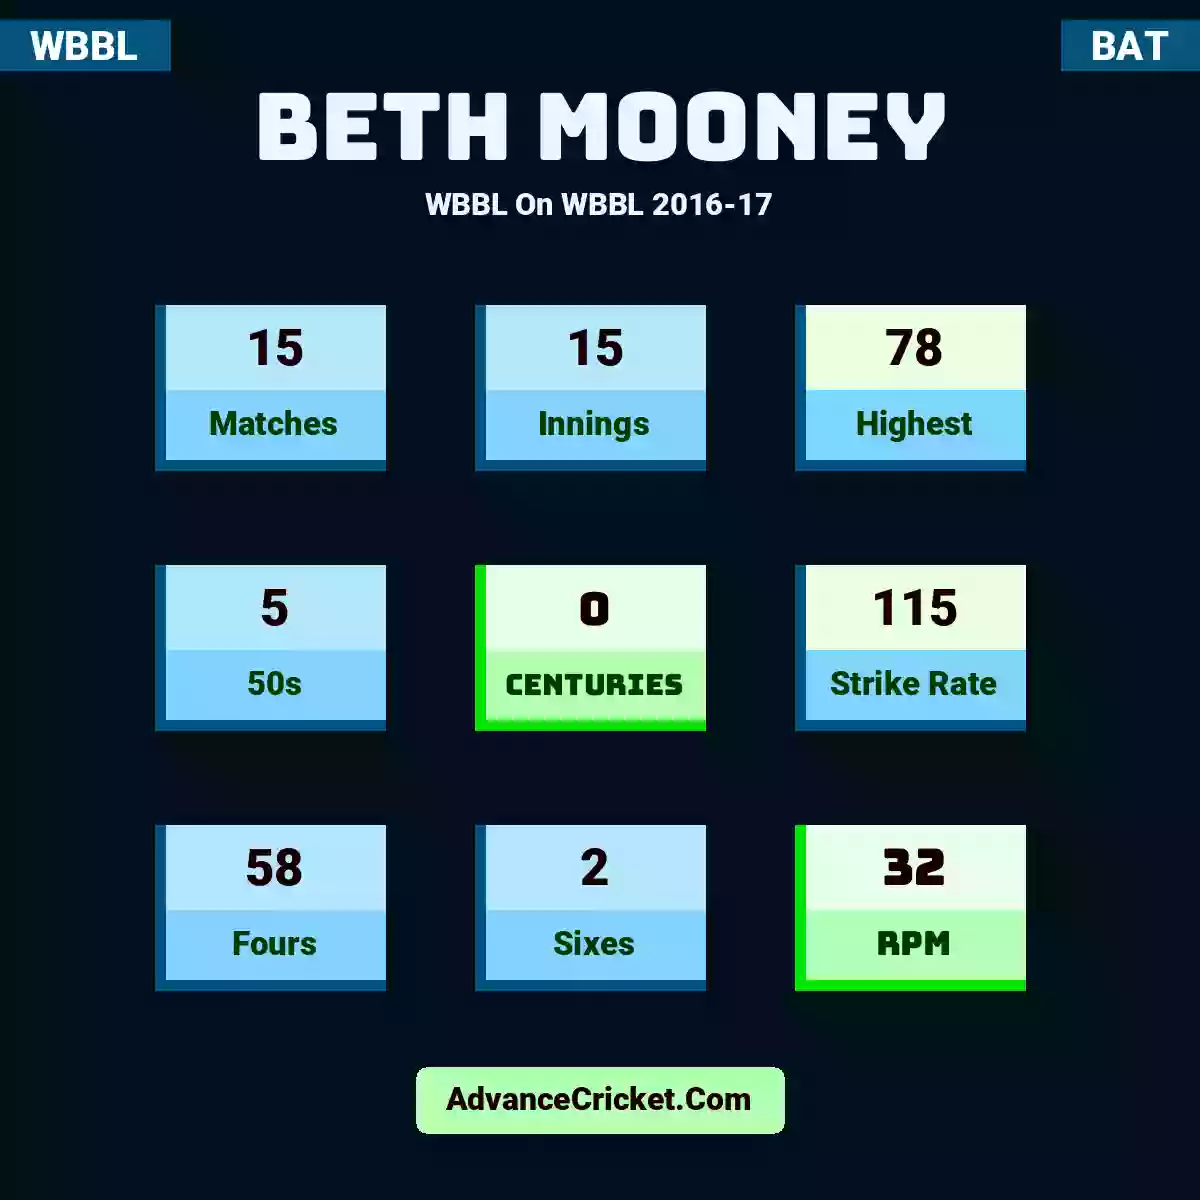 Beth Mooney WBBL  On WBBL 2016-17, Beth Mooney played 15 matches, scored 78 runs as highest, 5 half-centuries, and 0 centuries, with a strike rate of 115. B.Mooney hit 58 fours and 2 sixes, with an RPM of 32.